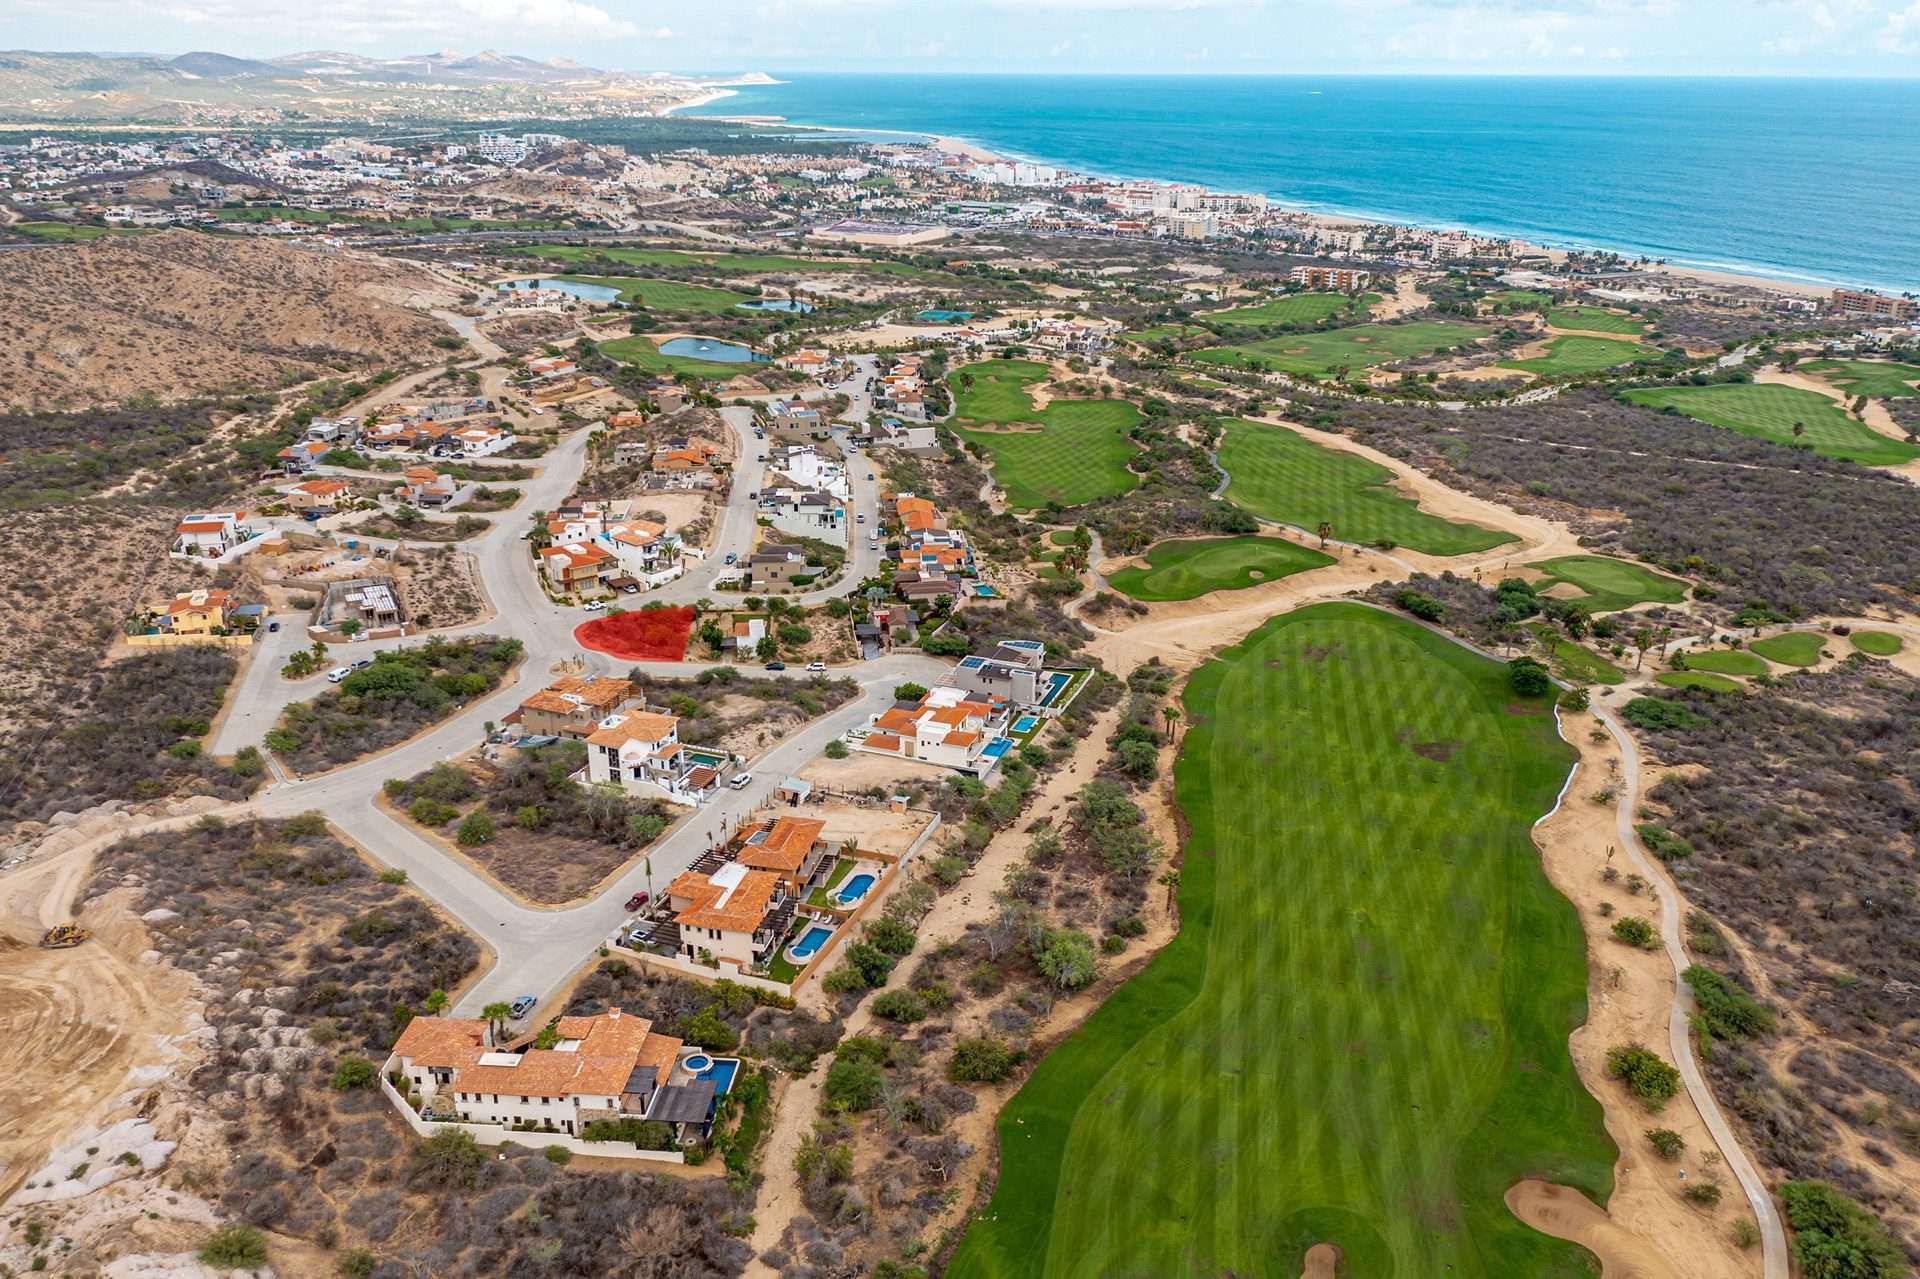 Club Campestre For Sale